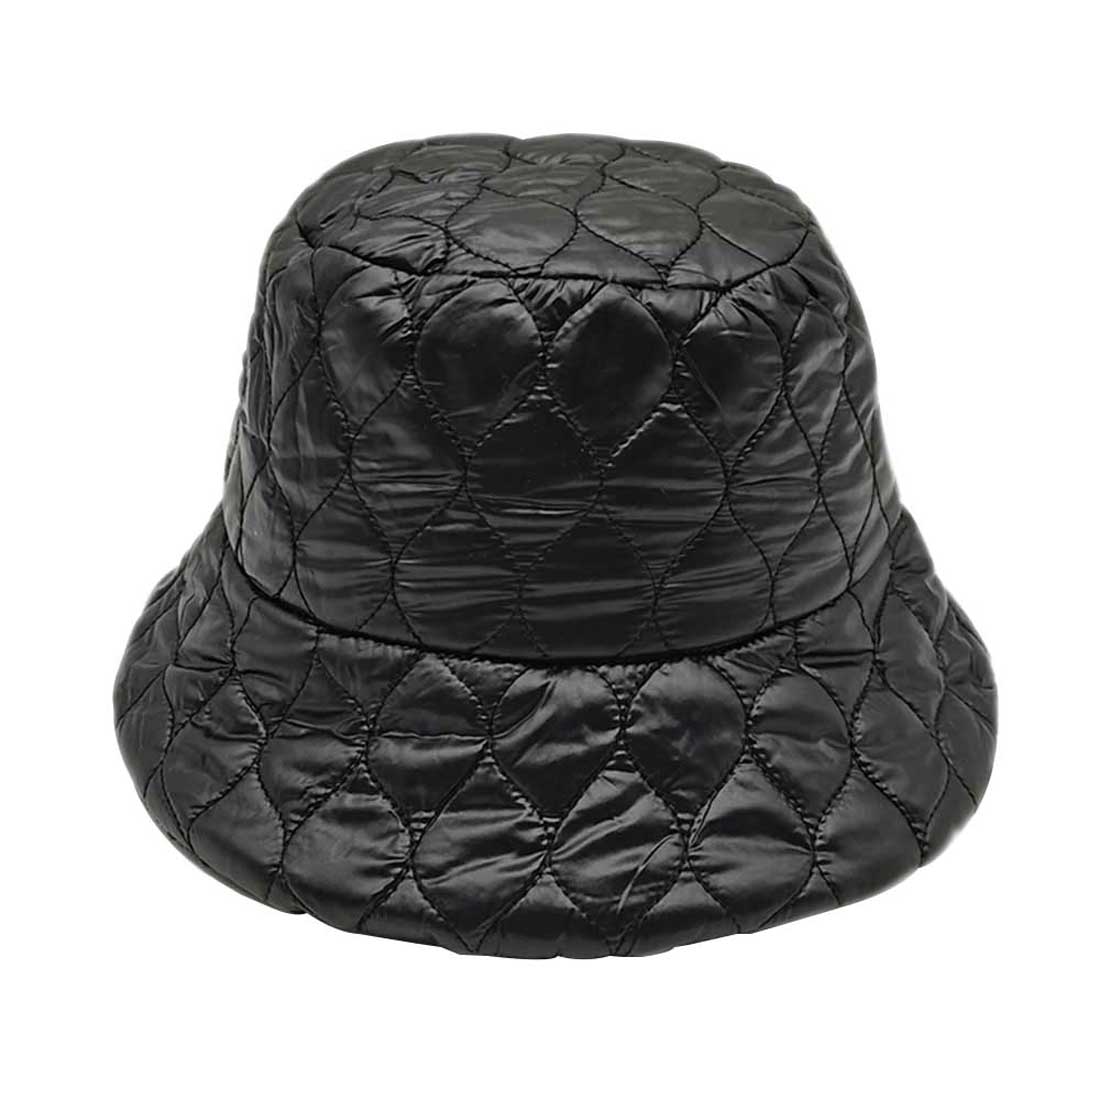 Black Wave Padded Bucket Hat, Show your trendy side with this chic Wave Padded Bucket Hat. Have fun and look Stylish anywhere outdoors. Great for covering up when you are having a bad hair day. Perfect for protecting you from the sun, rain, wind, snow, beach, pool, camping, or any outdoor activities. Amps up your outlook with confidence with this trendy bucket hat.